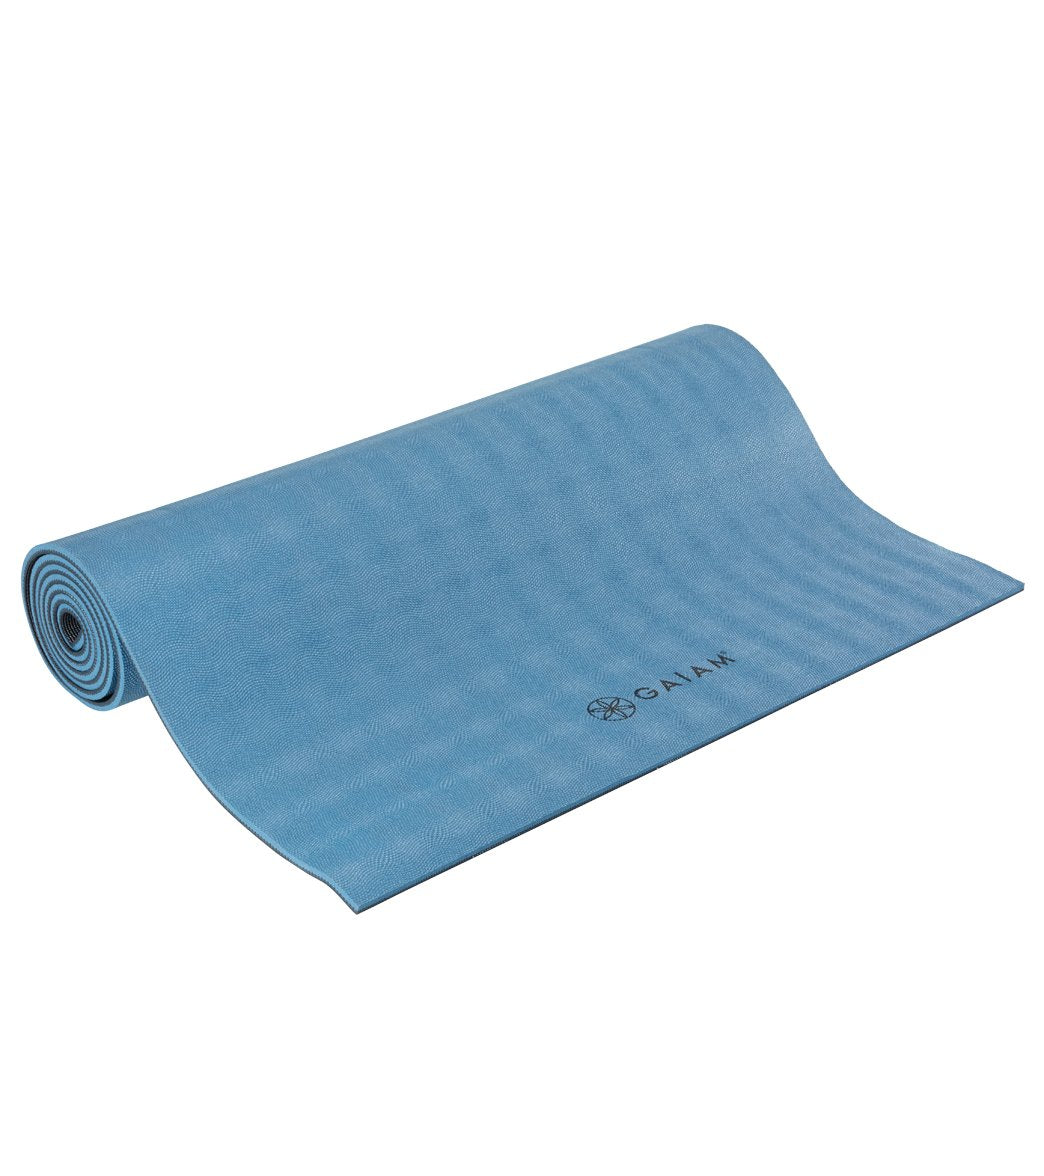 Gaiam Dry Grip Yoga Mat 5mm Thick Non Slip Exercise Fitness Mat Blue